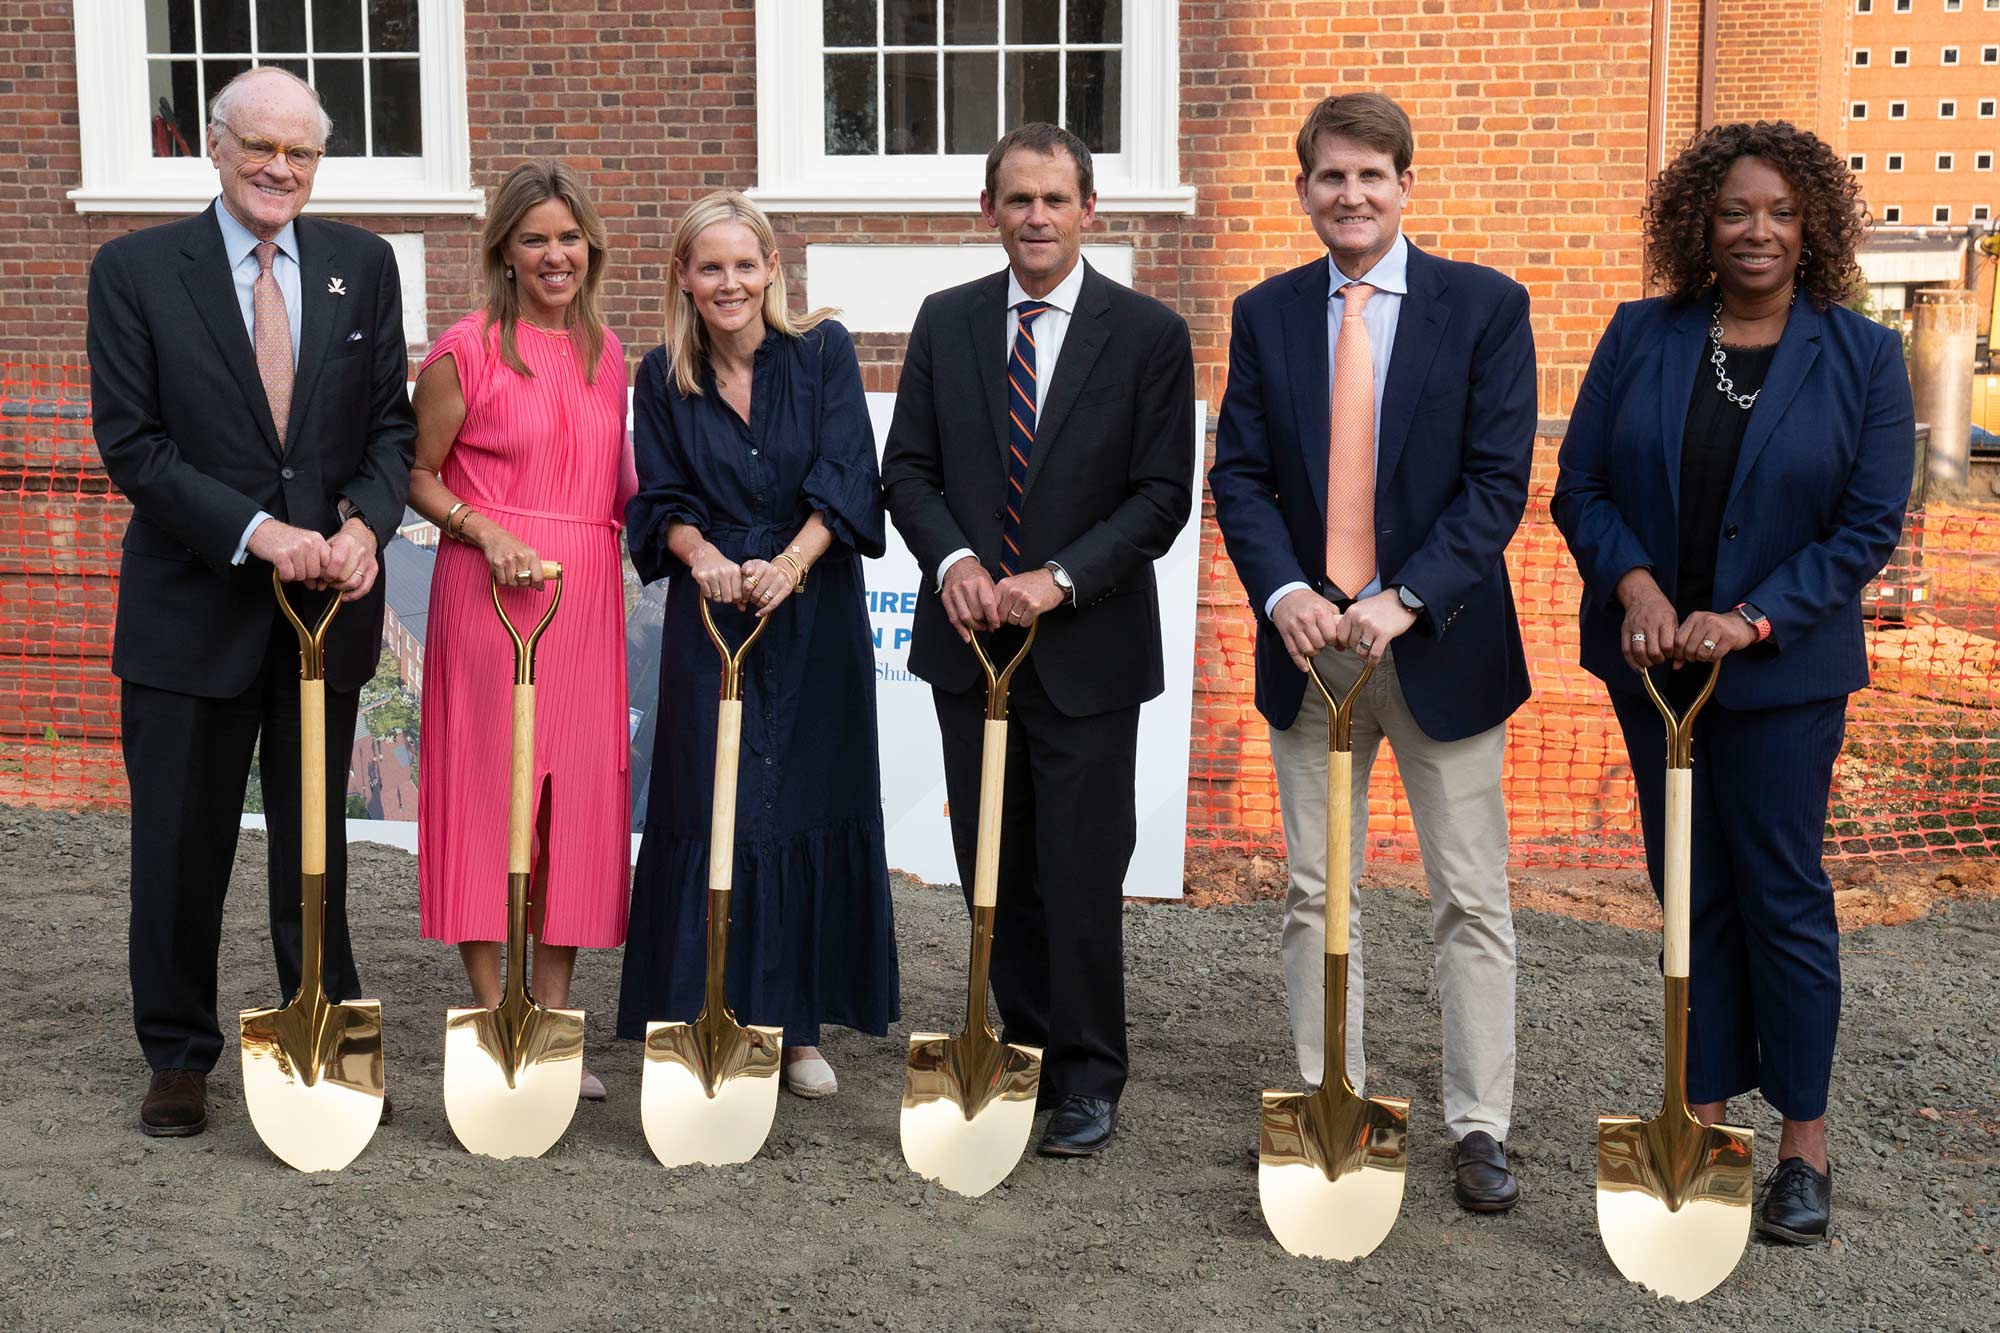 Group of six people with golden shovels in the ground smiling at the camera during a groundbreaking ceremony.